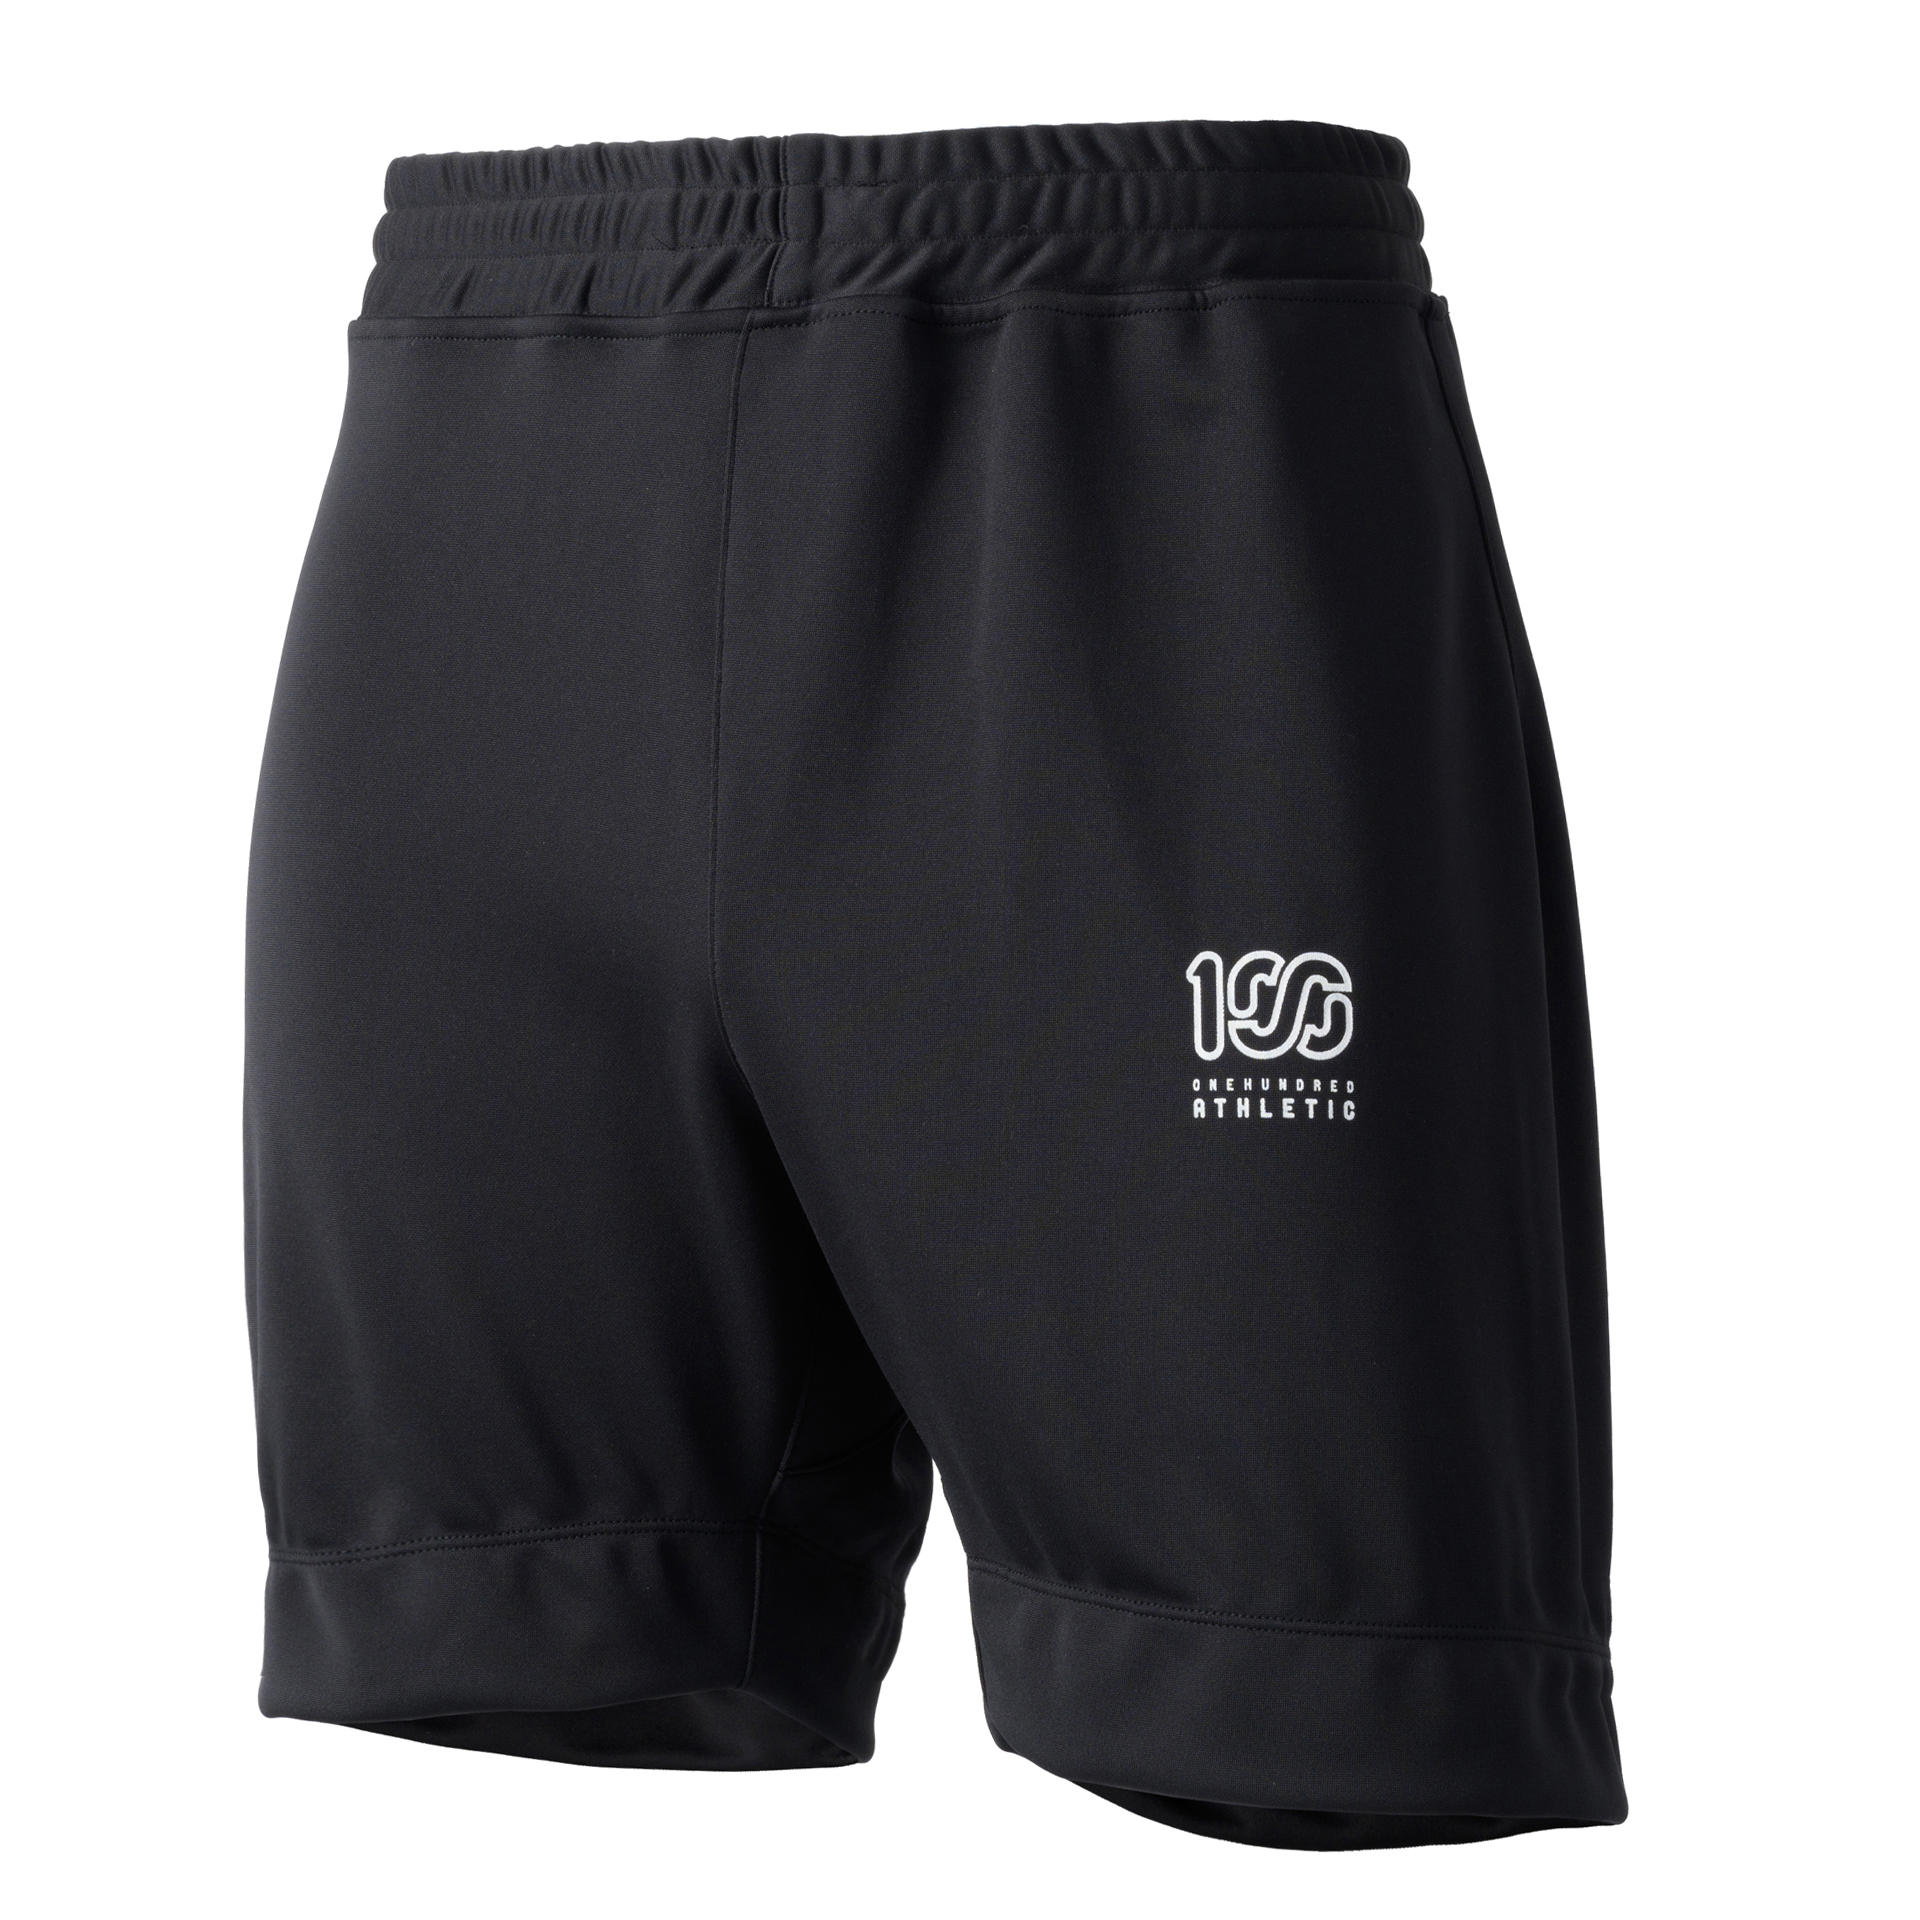 100A STRETCH DRY WORKOUT SHORTS